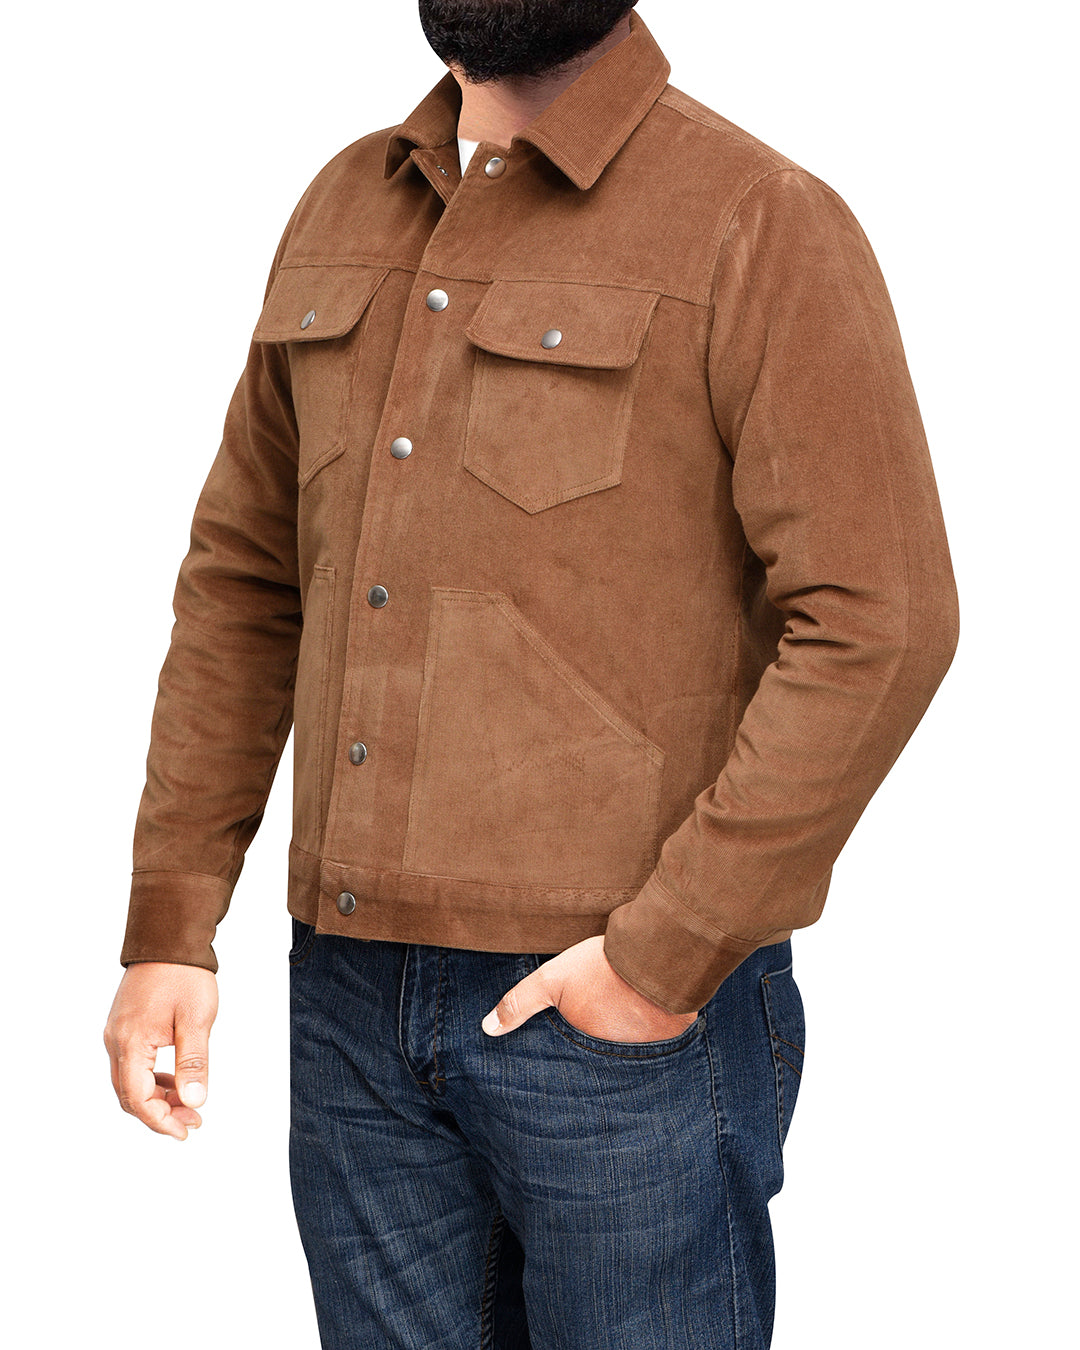 Model wearing the cord shirt jacket for men by Luxire in light brown one hand in pocket